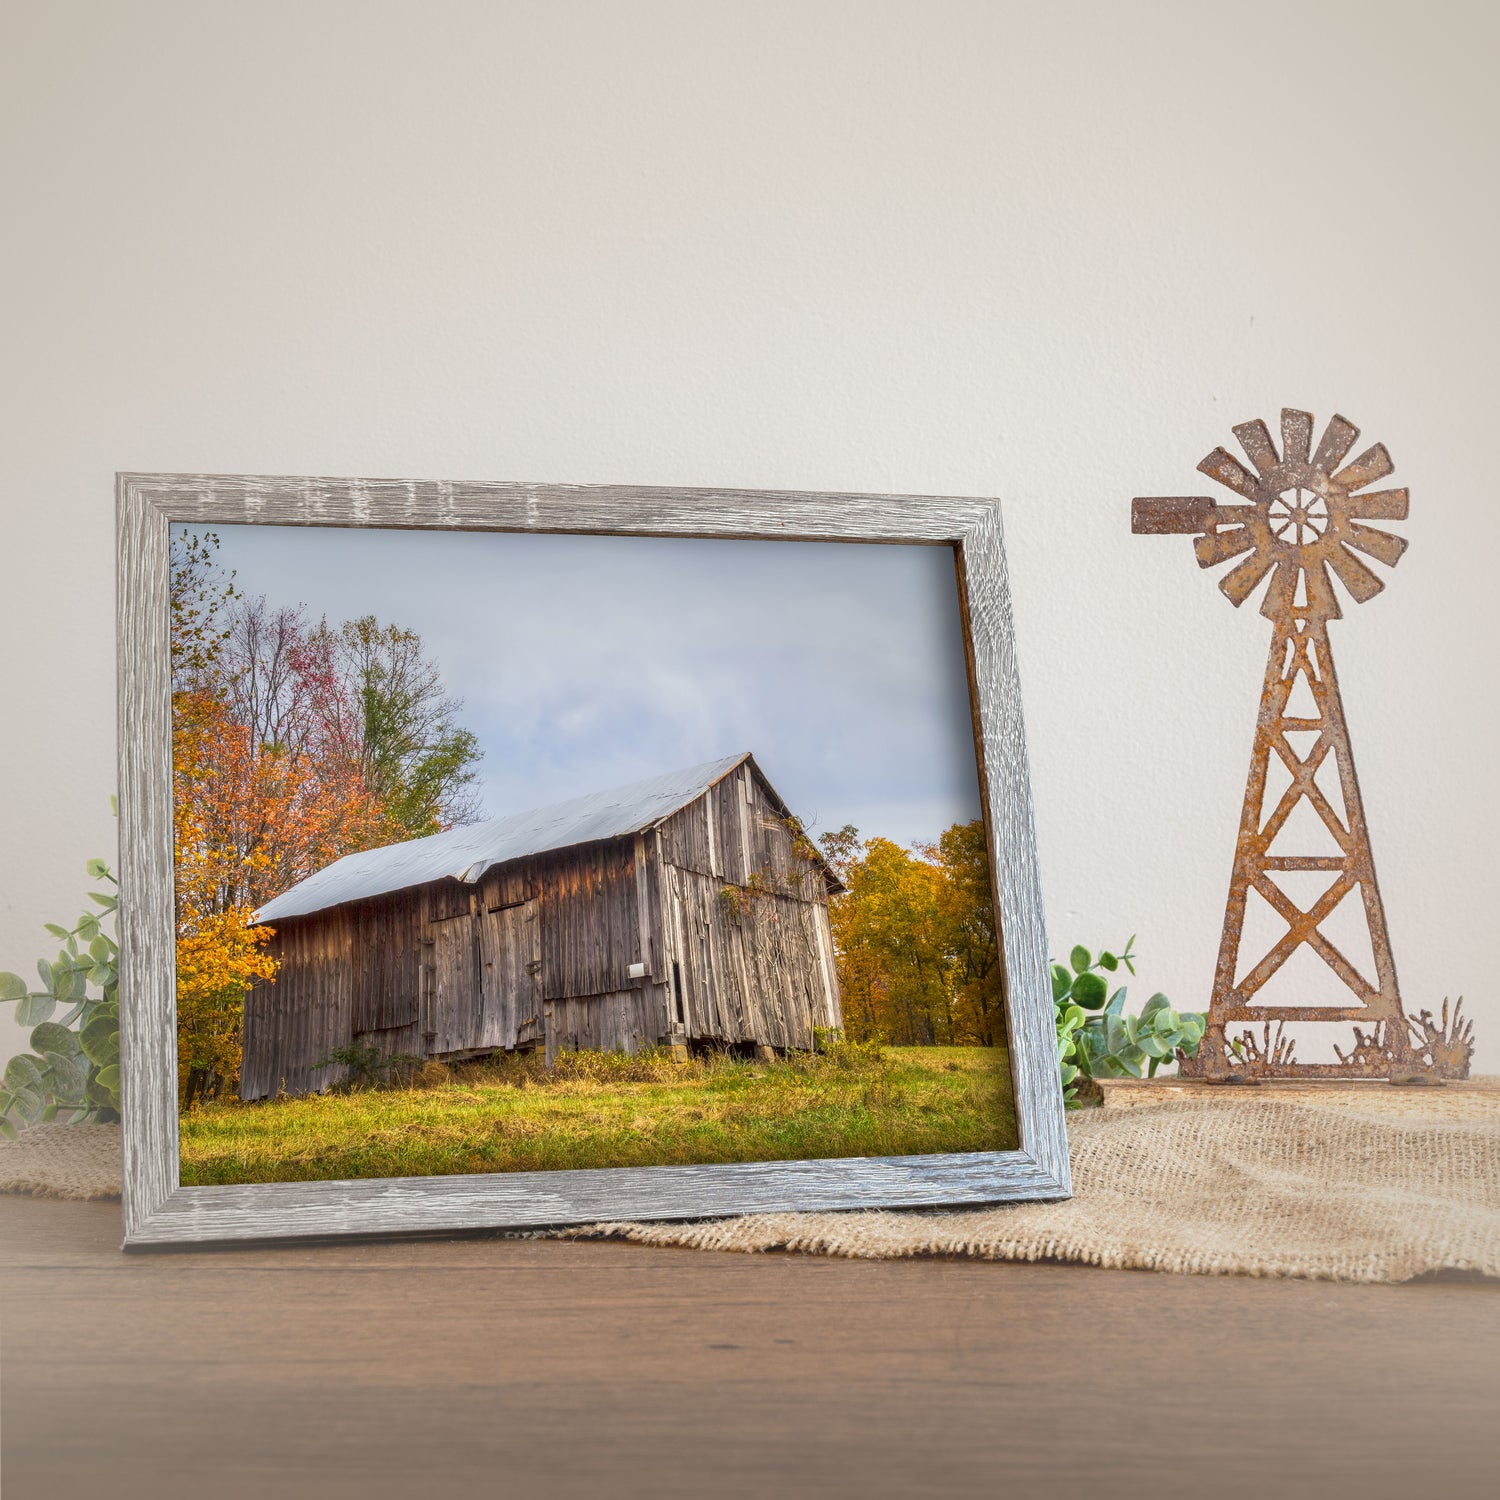 mhouse wall art print featuring the rustic Chapel Ridge barn, set against a serene rural backdrop adorned with vibrant fall foliage.